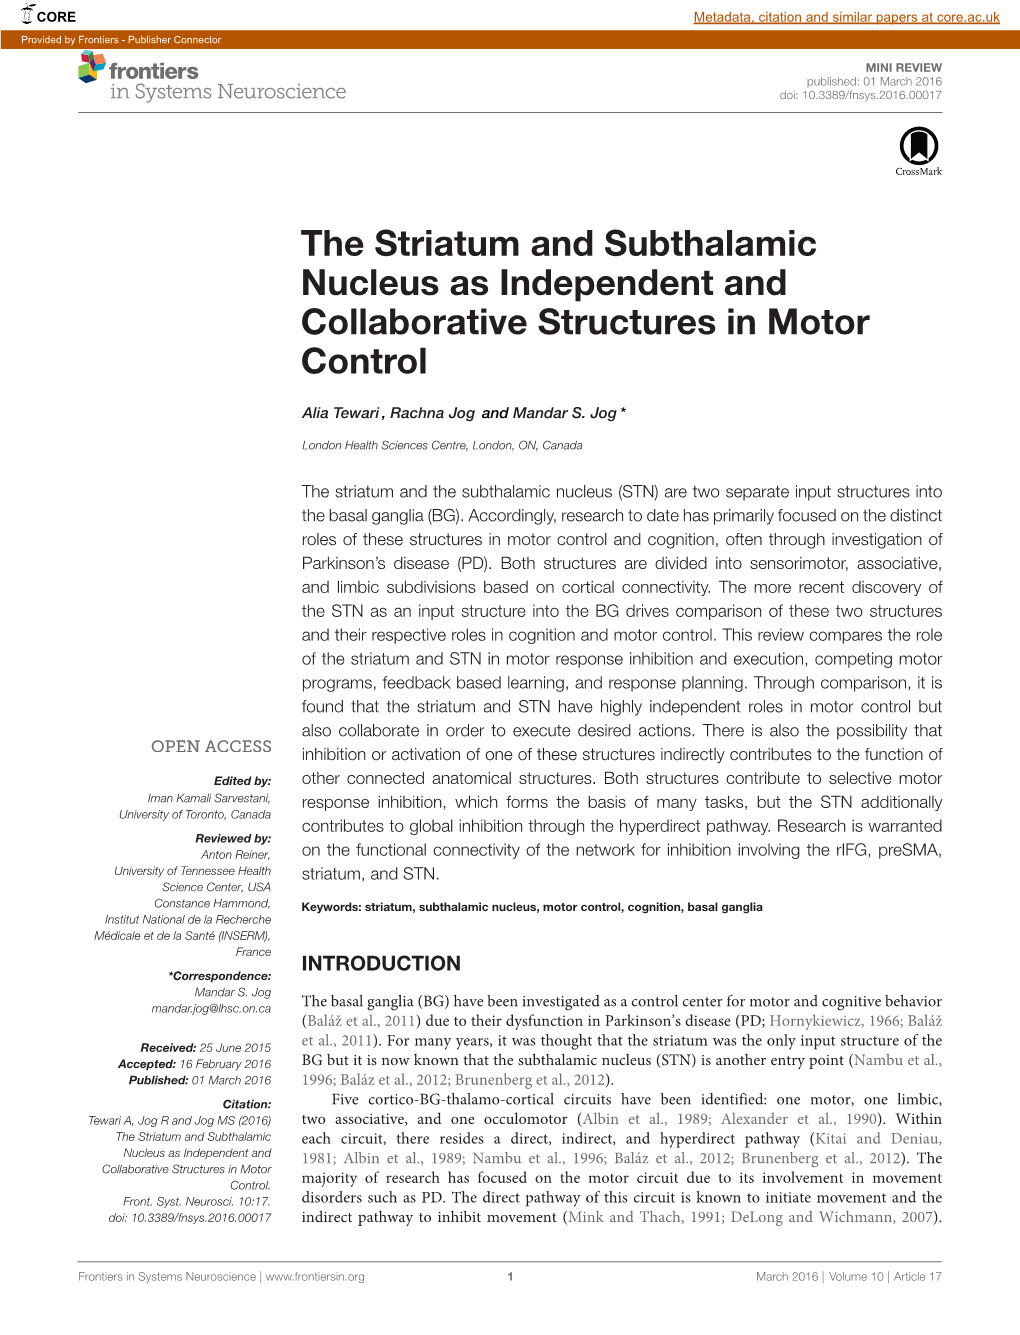 The Striatum and Subthalamic Nucleus As Independent and Collaborative Structures in Motor Control